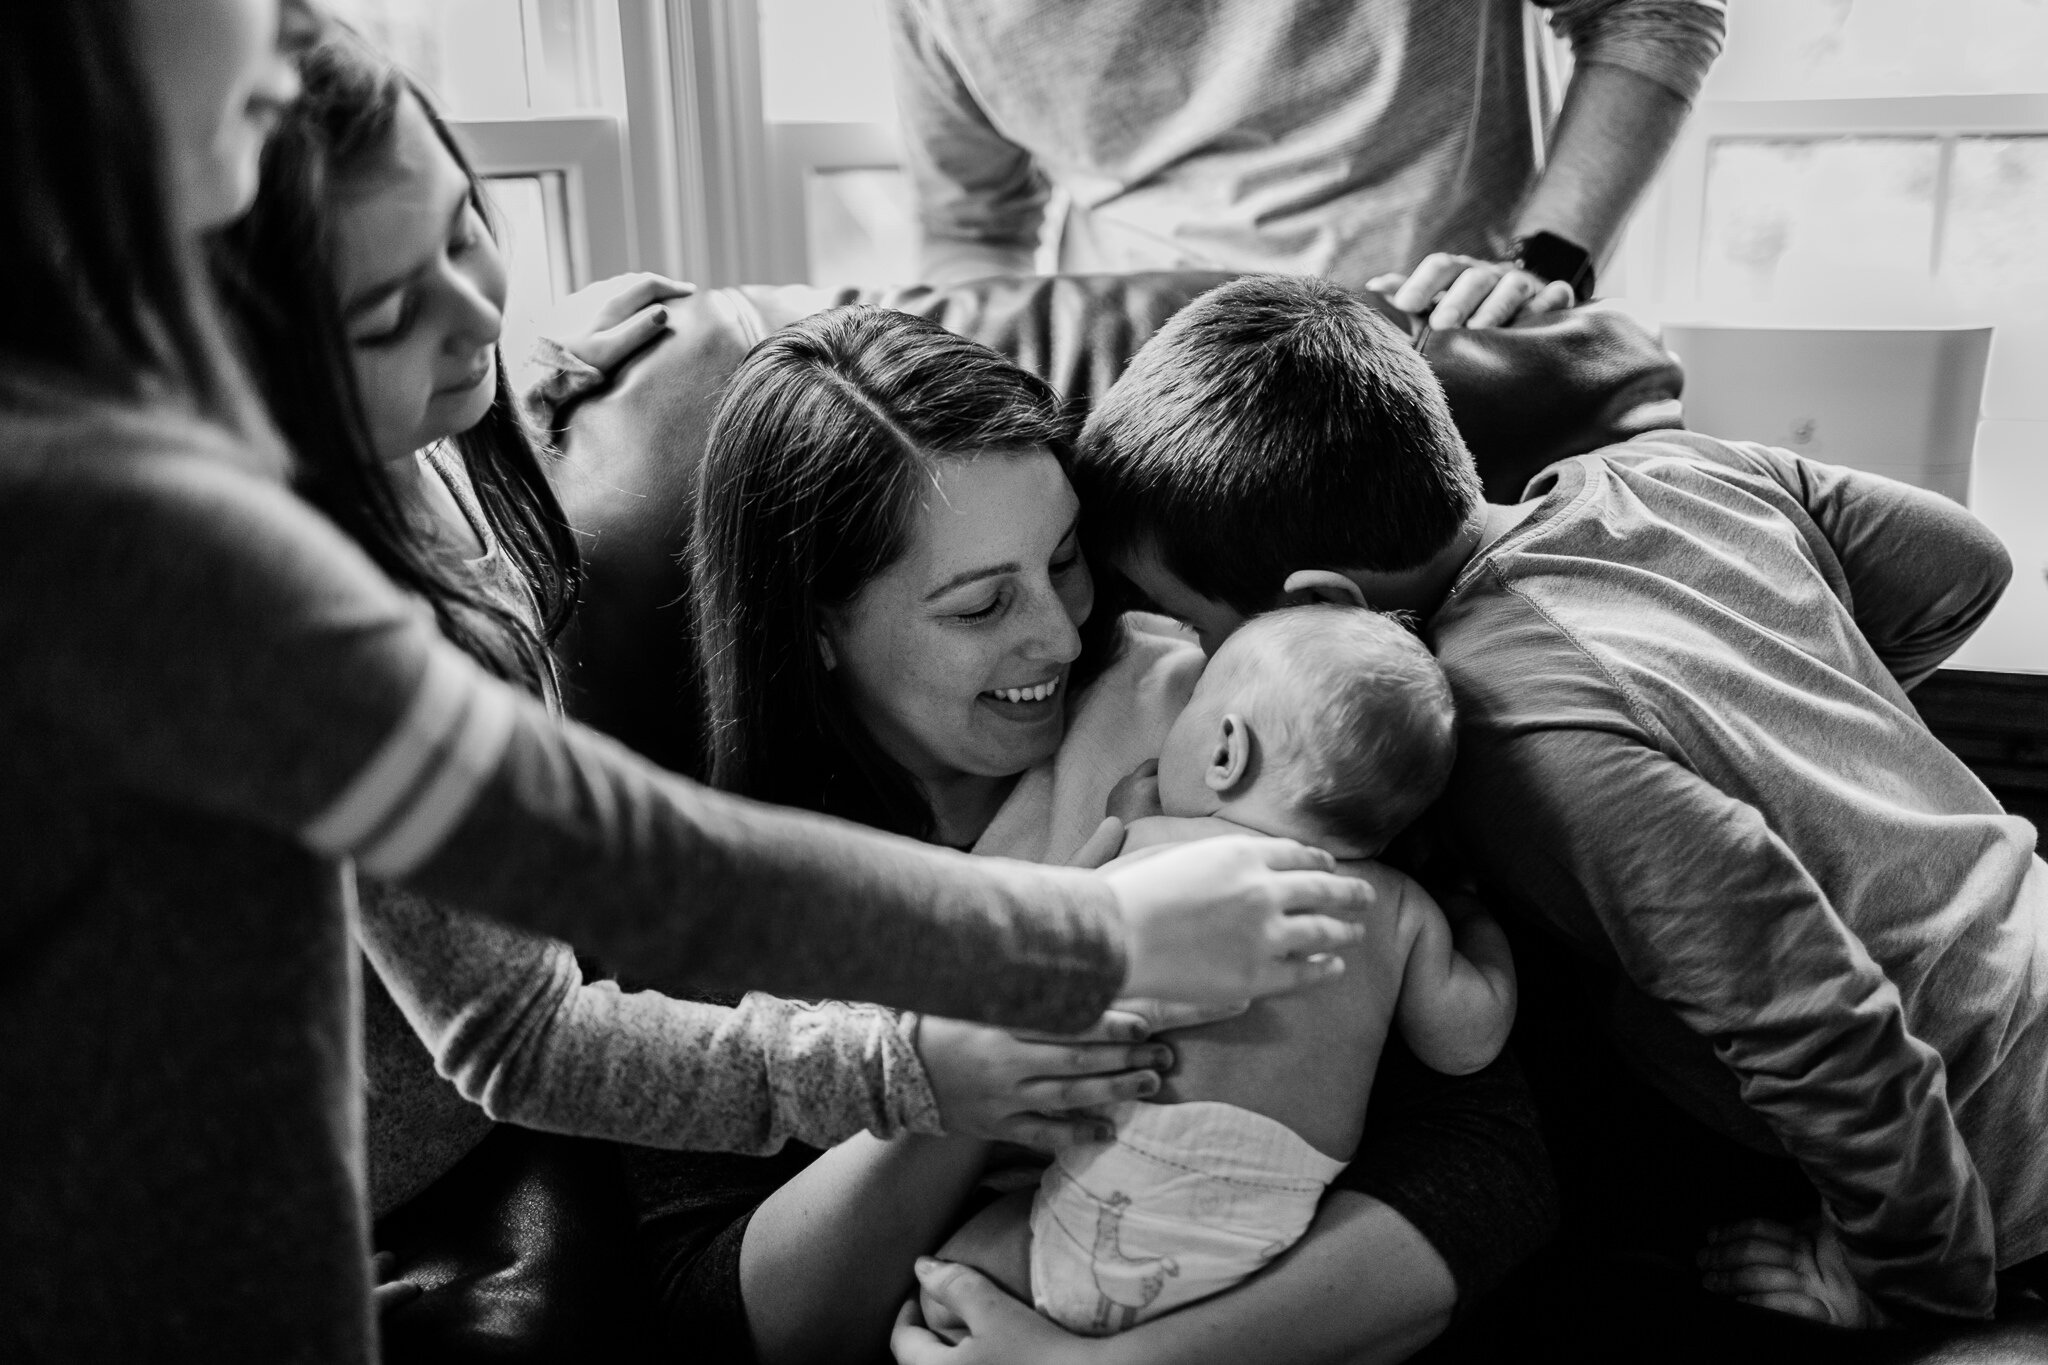 Raleigh Family Photographer | By G. Lin Photography | Lifestyle session at home | Siblings snuggling with mom and baby